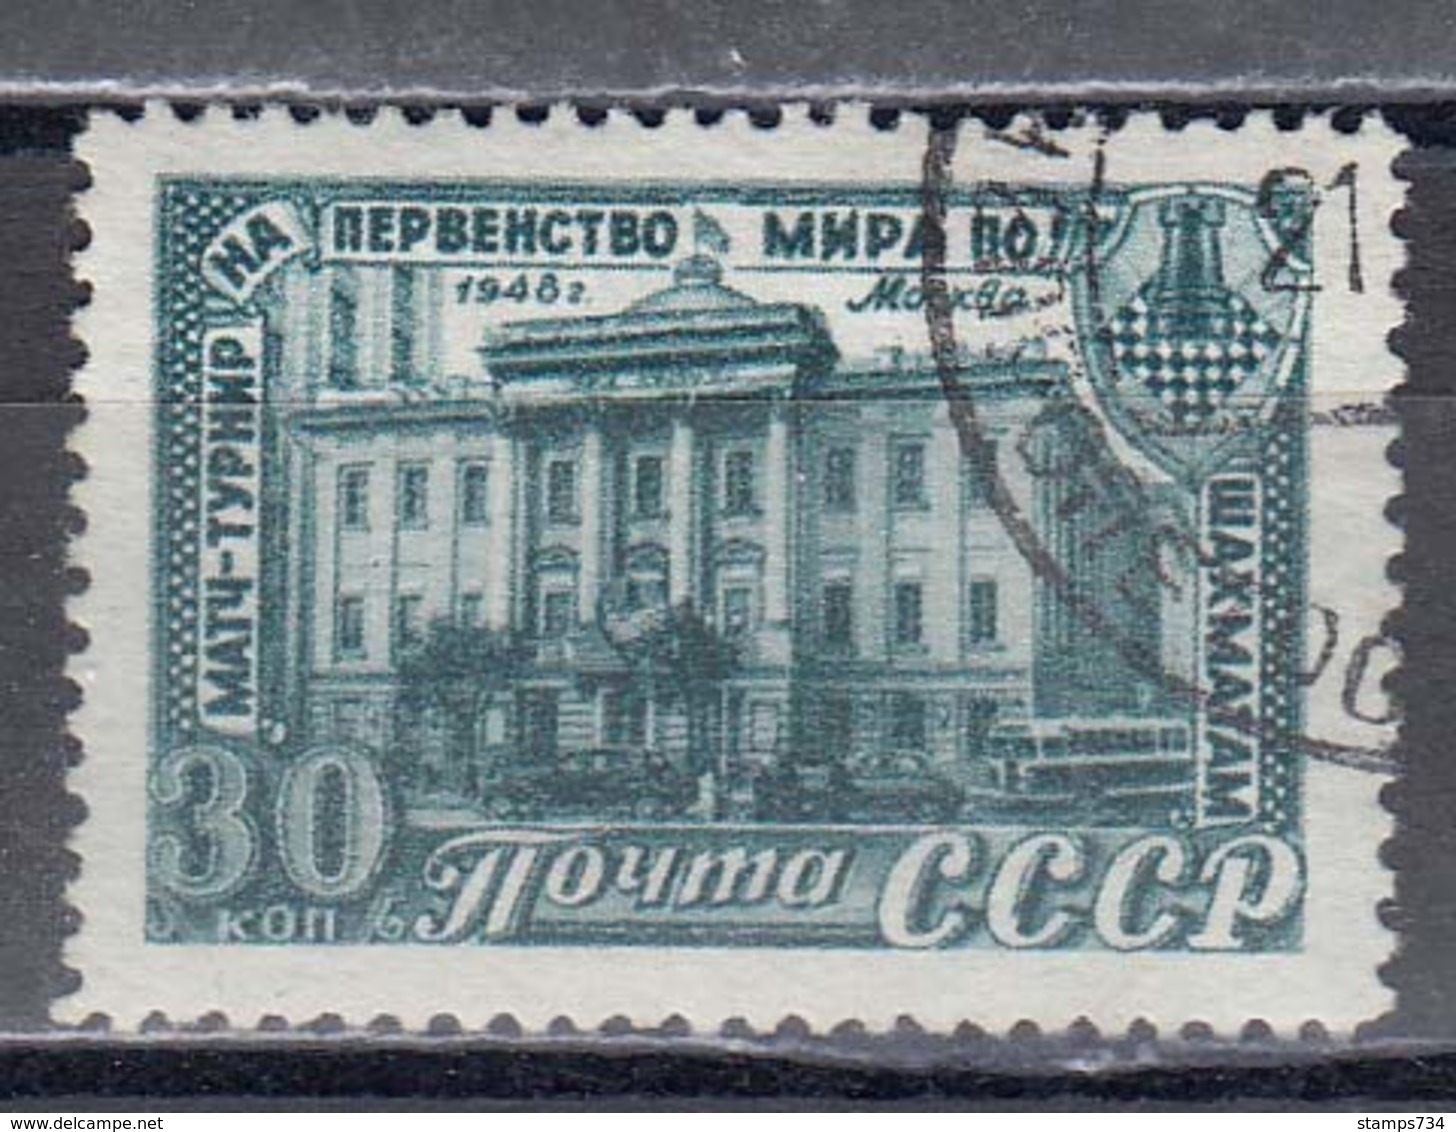 USSR 1948 - Schach-WM, Mi-Nr. 1292, Used - Used Stamps